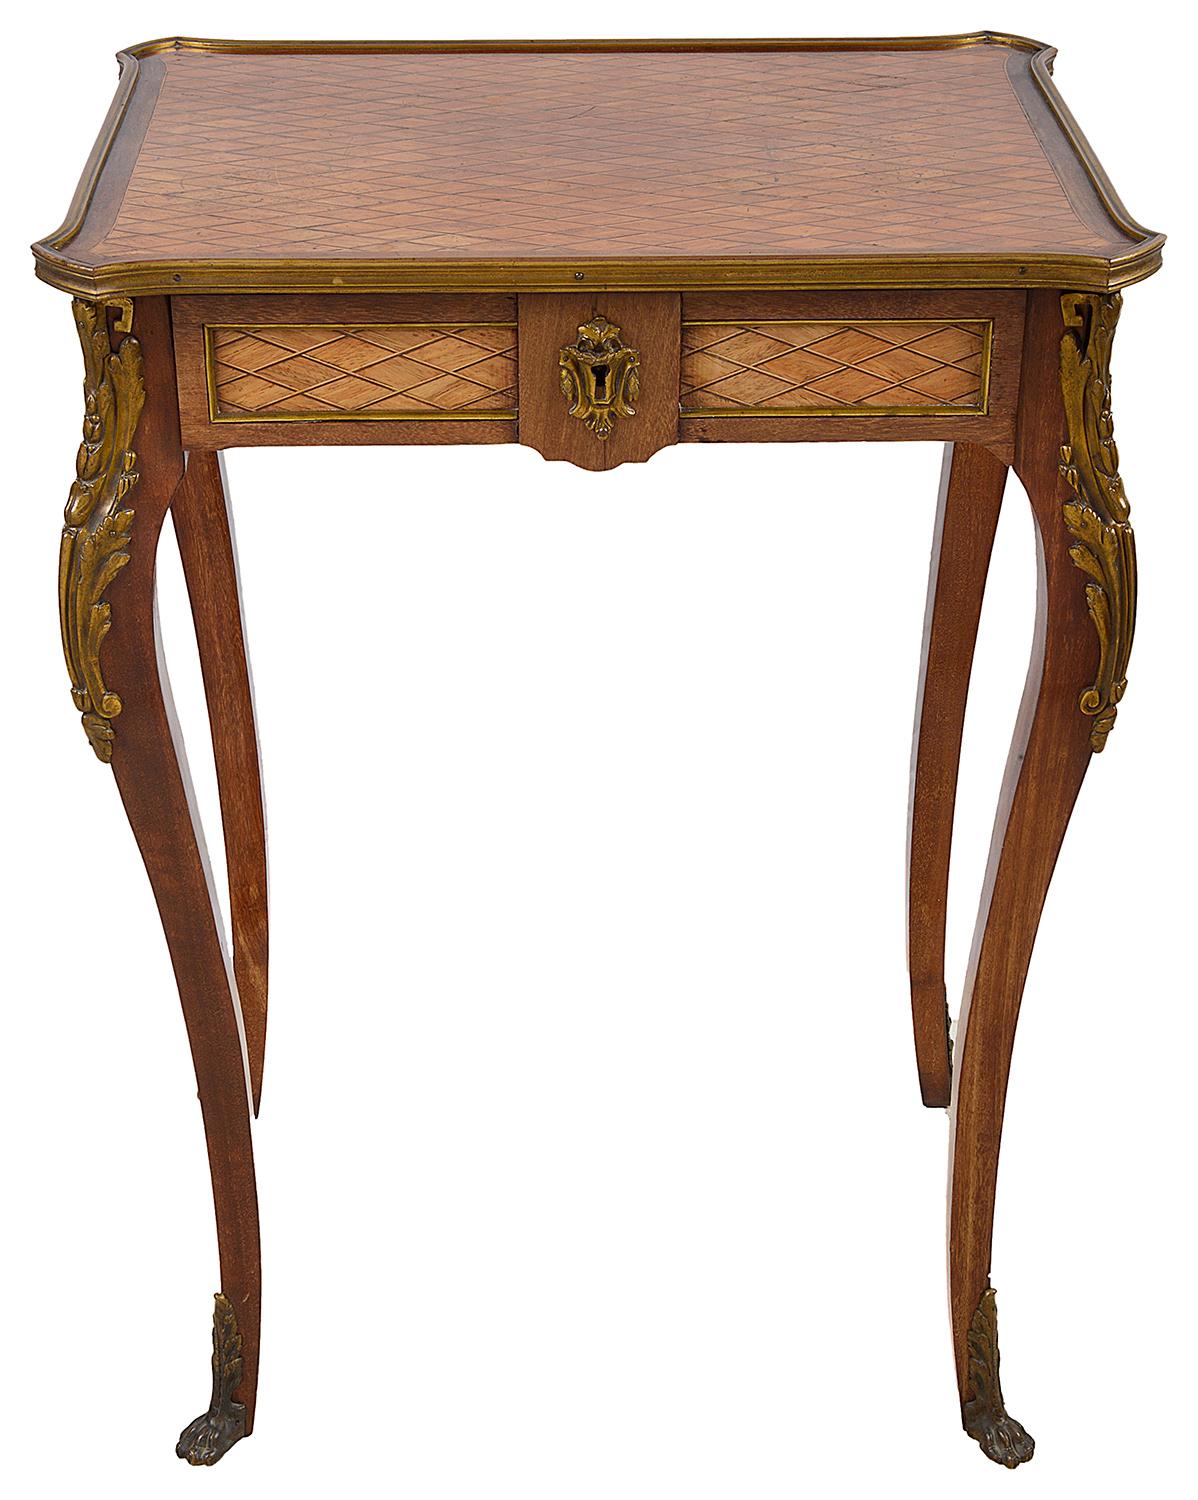 A very good quality late 19th century French Louis XVI style side table, having fine quality parquetry inlaid top and frieze drawer, ormolu mounts and raised on elegant cabriole legs.